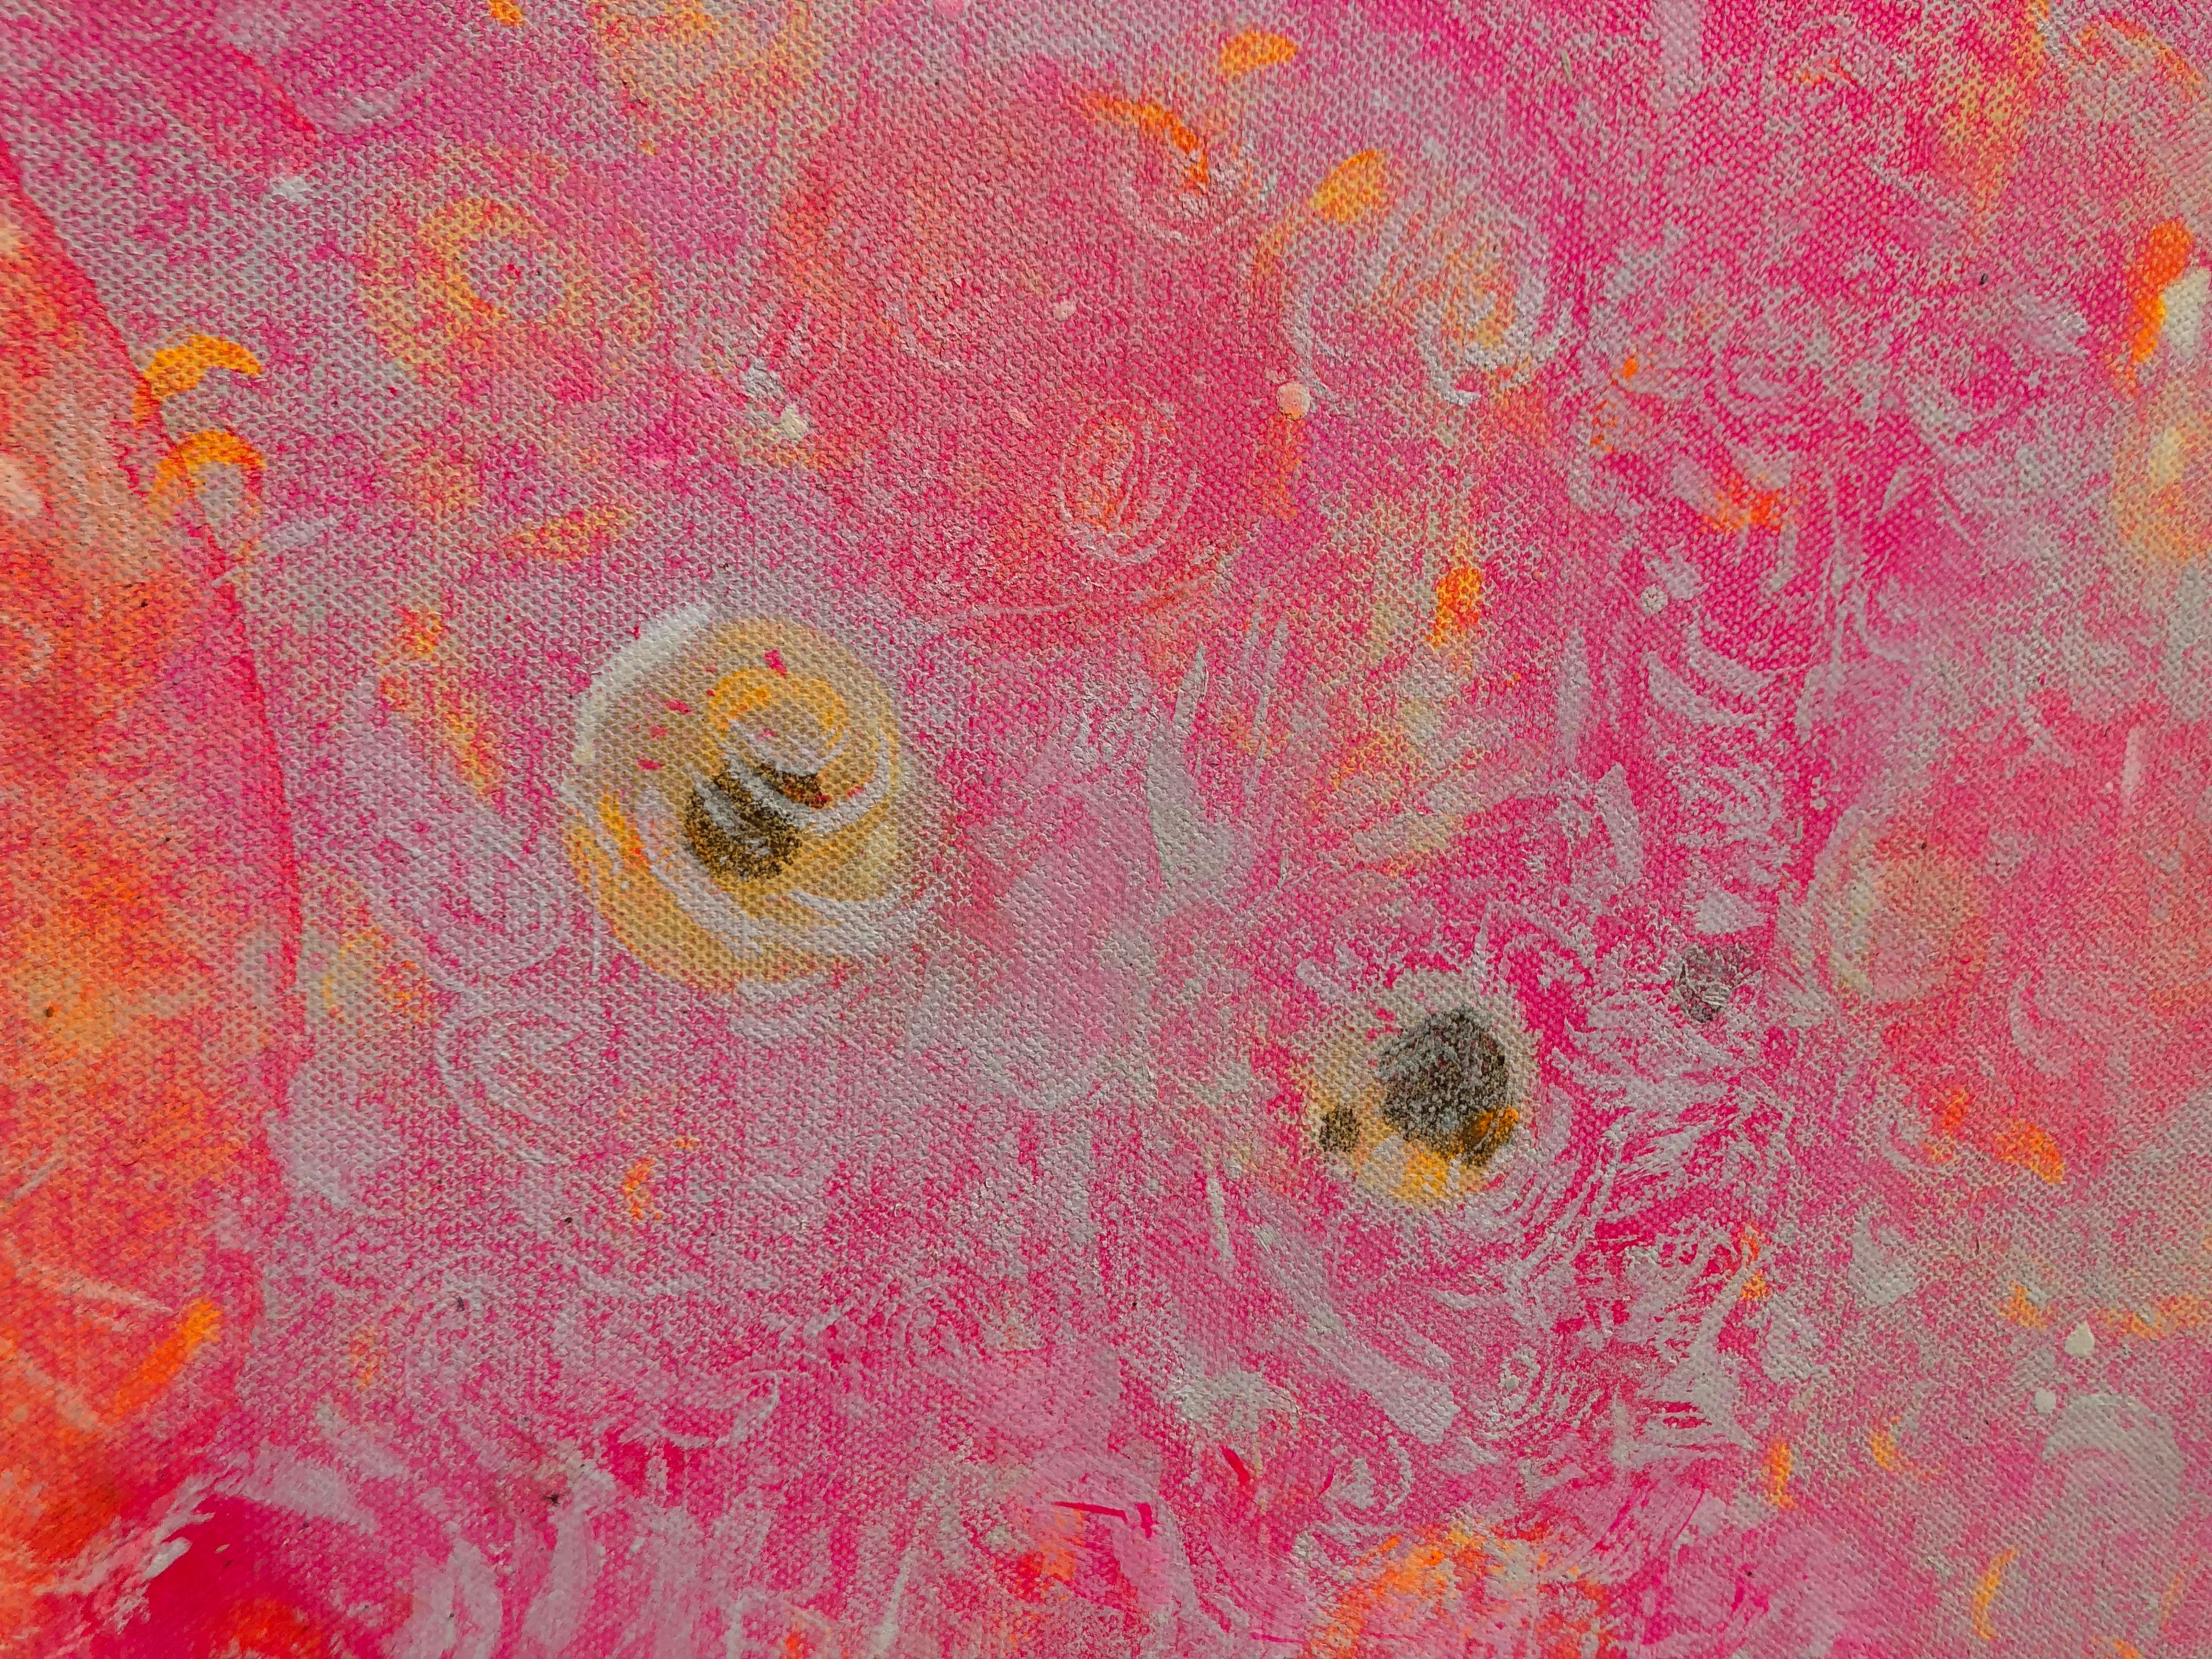 Morning levitation 3 - Painting on canvas, abstract metaphysical, gold, pink im Angebot 2